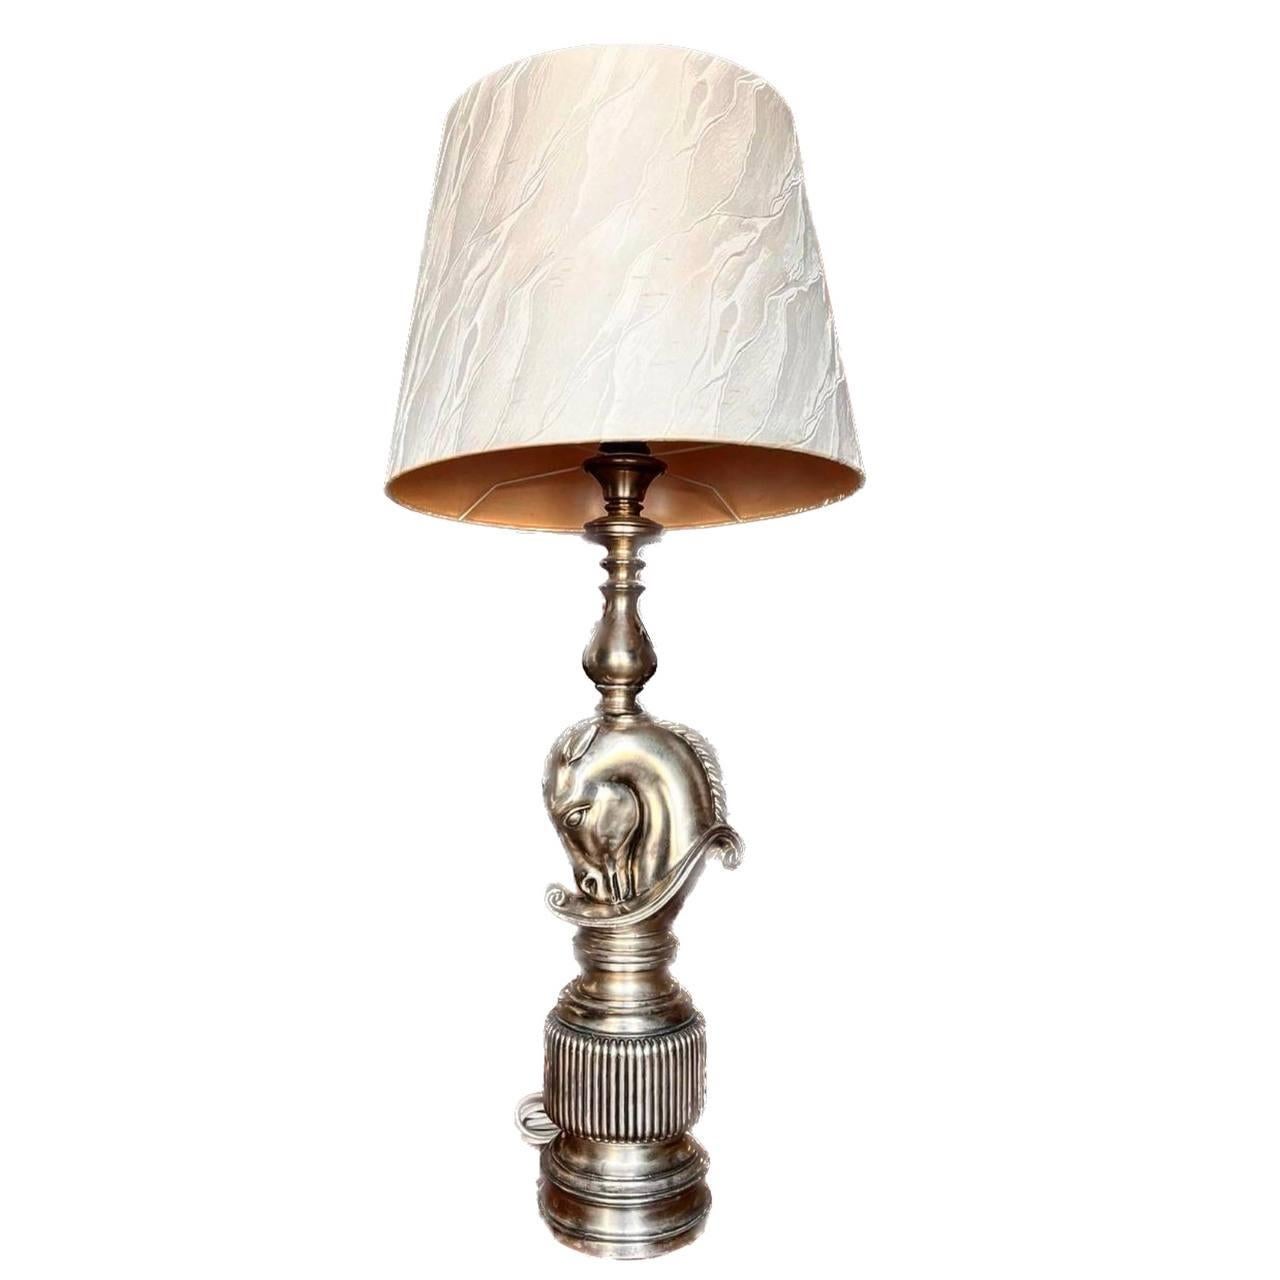 Large brass table lamp with shade from France, 1970s.

This elegant Knight chess piece lamp

The Elegant Knight chess piece table lamp is a work of fine art and the highest quality. 

Decorative lamp in addition to lighting, lighting for the